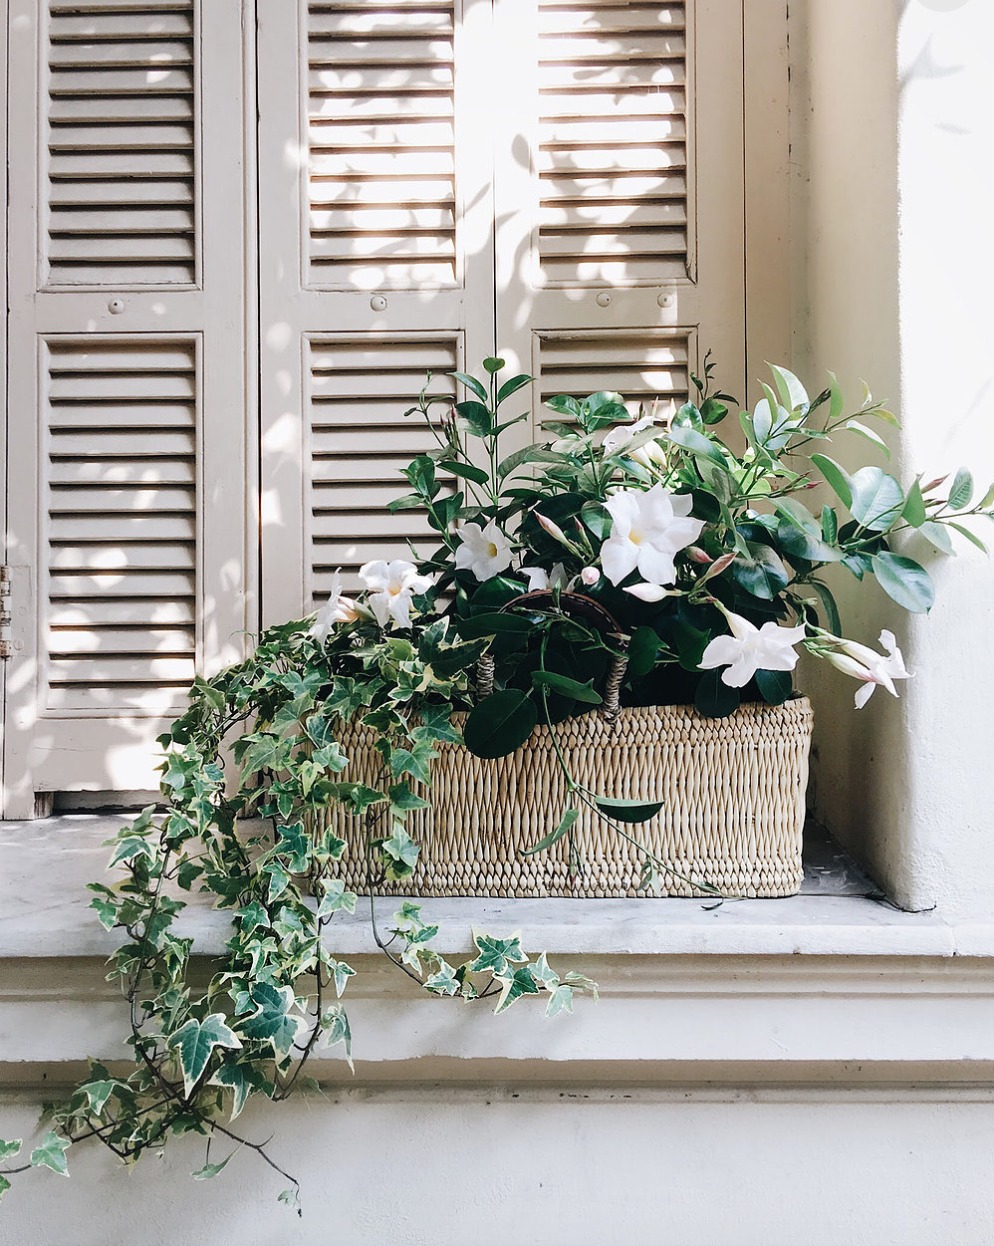 Rectangular basket with flowers and ivy in front of old shutters from Vivi et Margot.